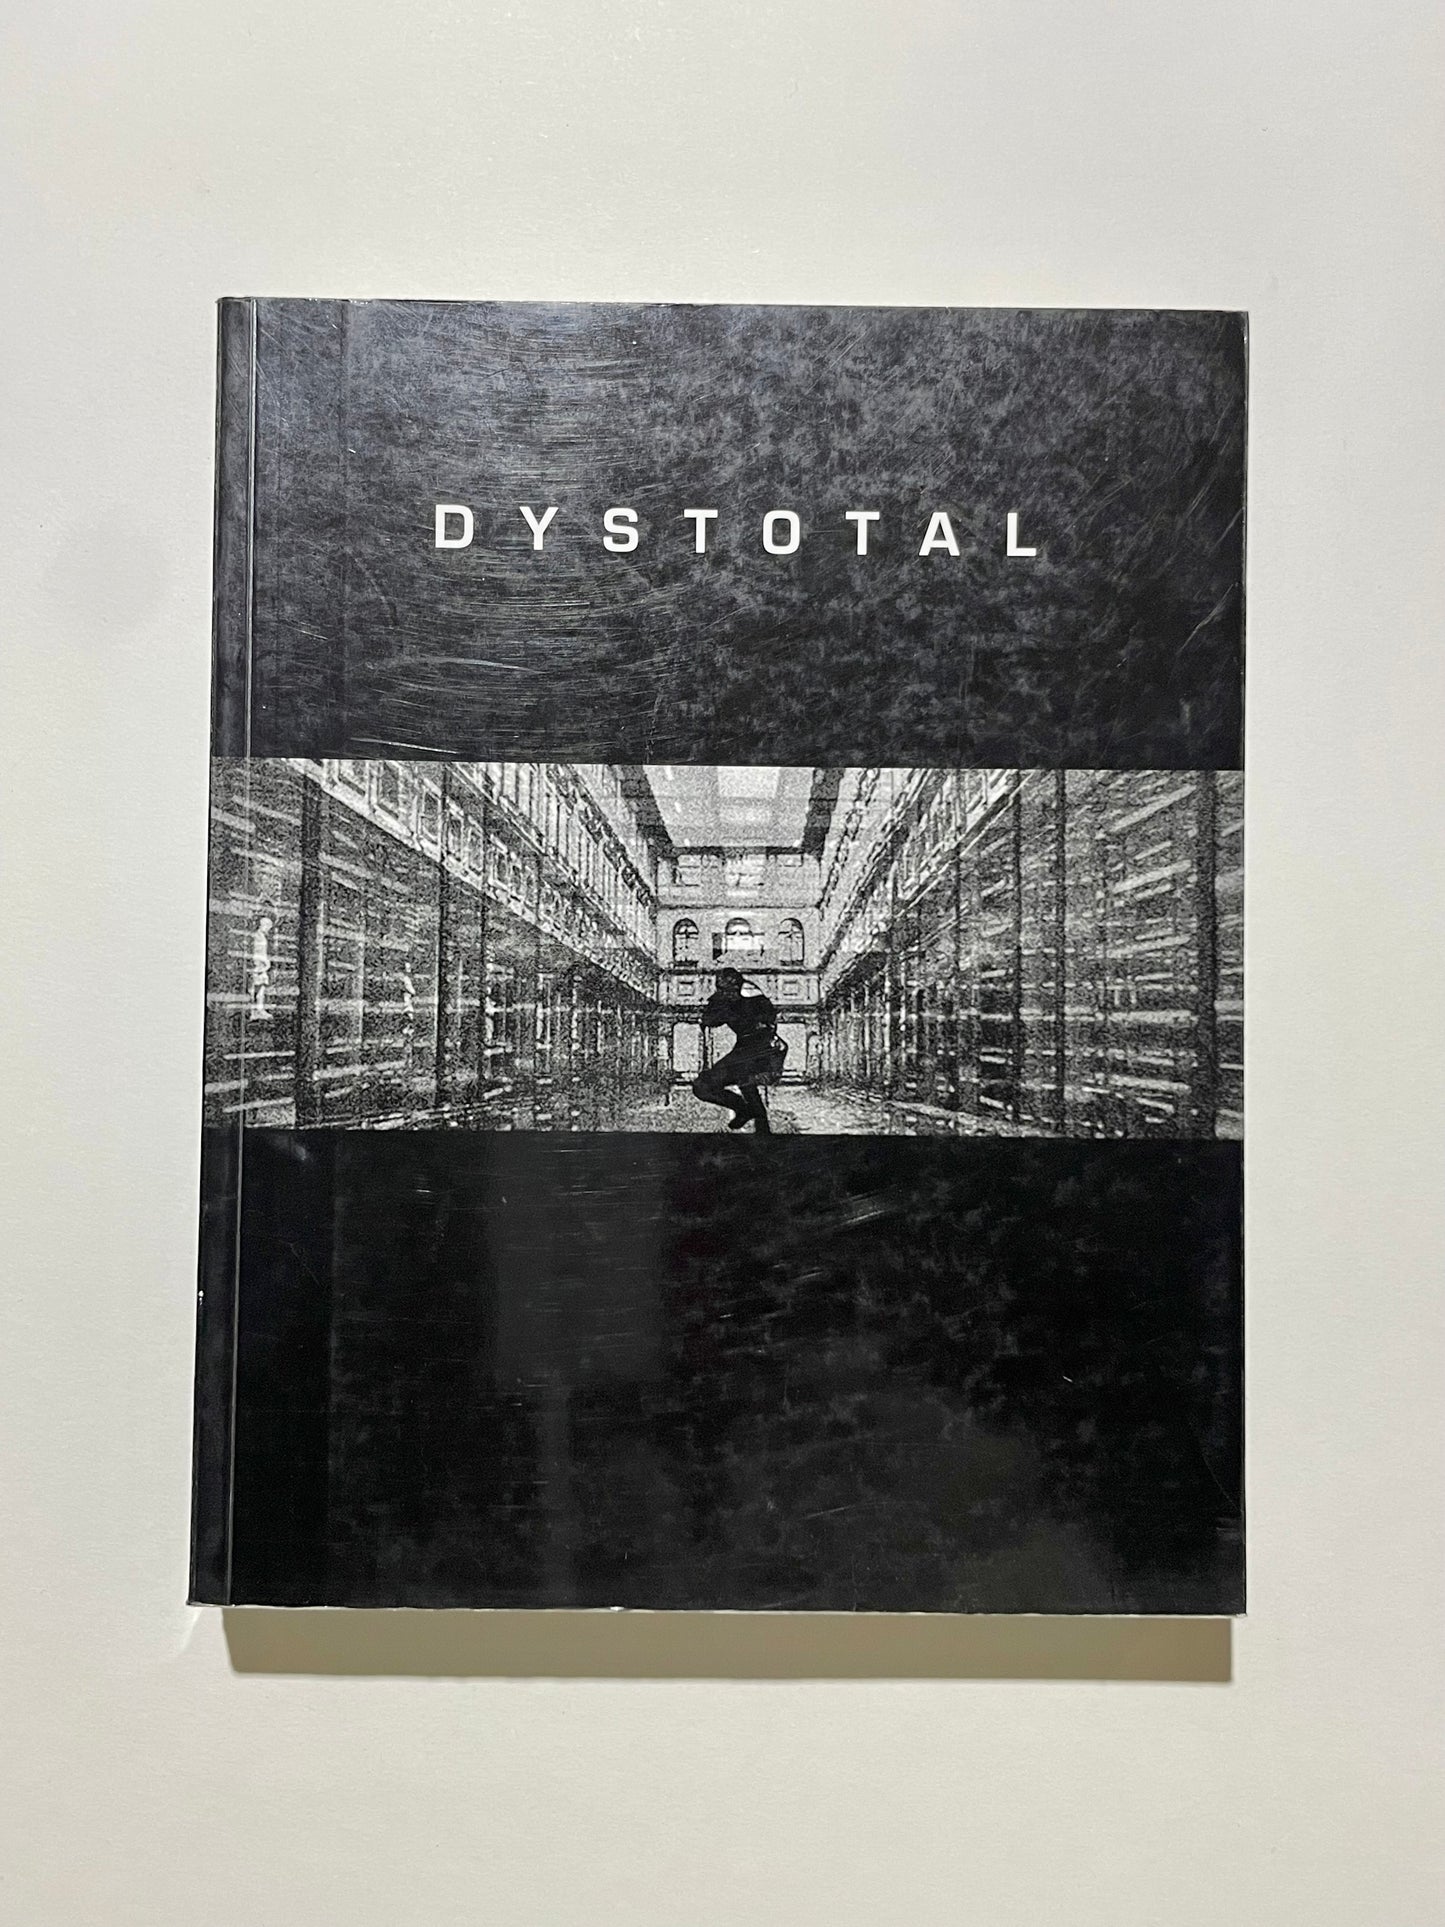 Dystotal